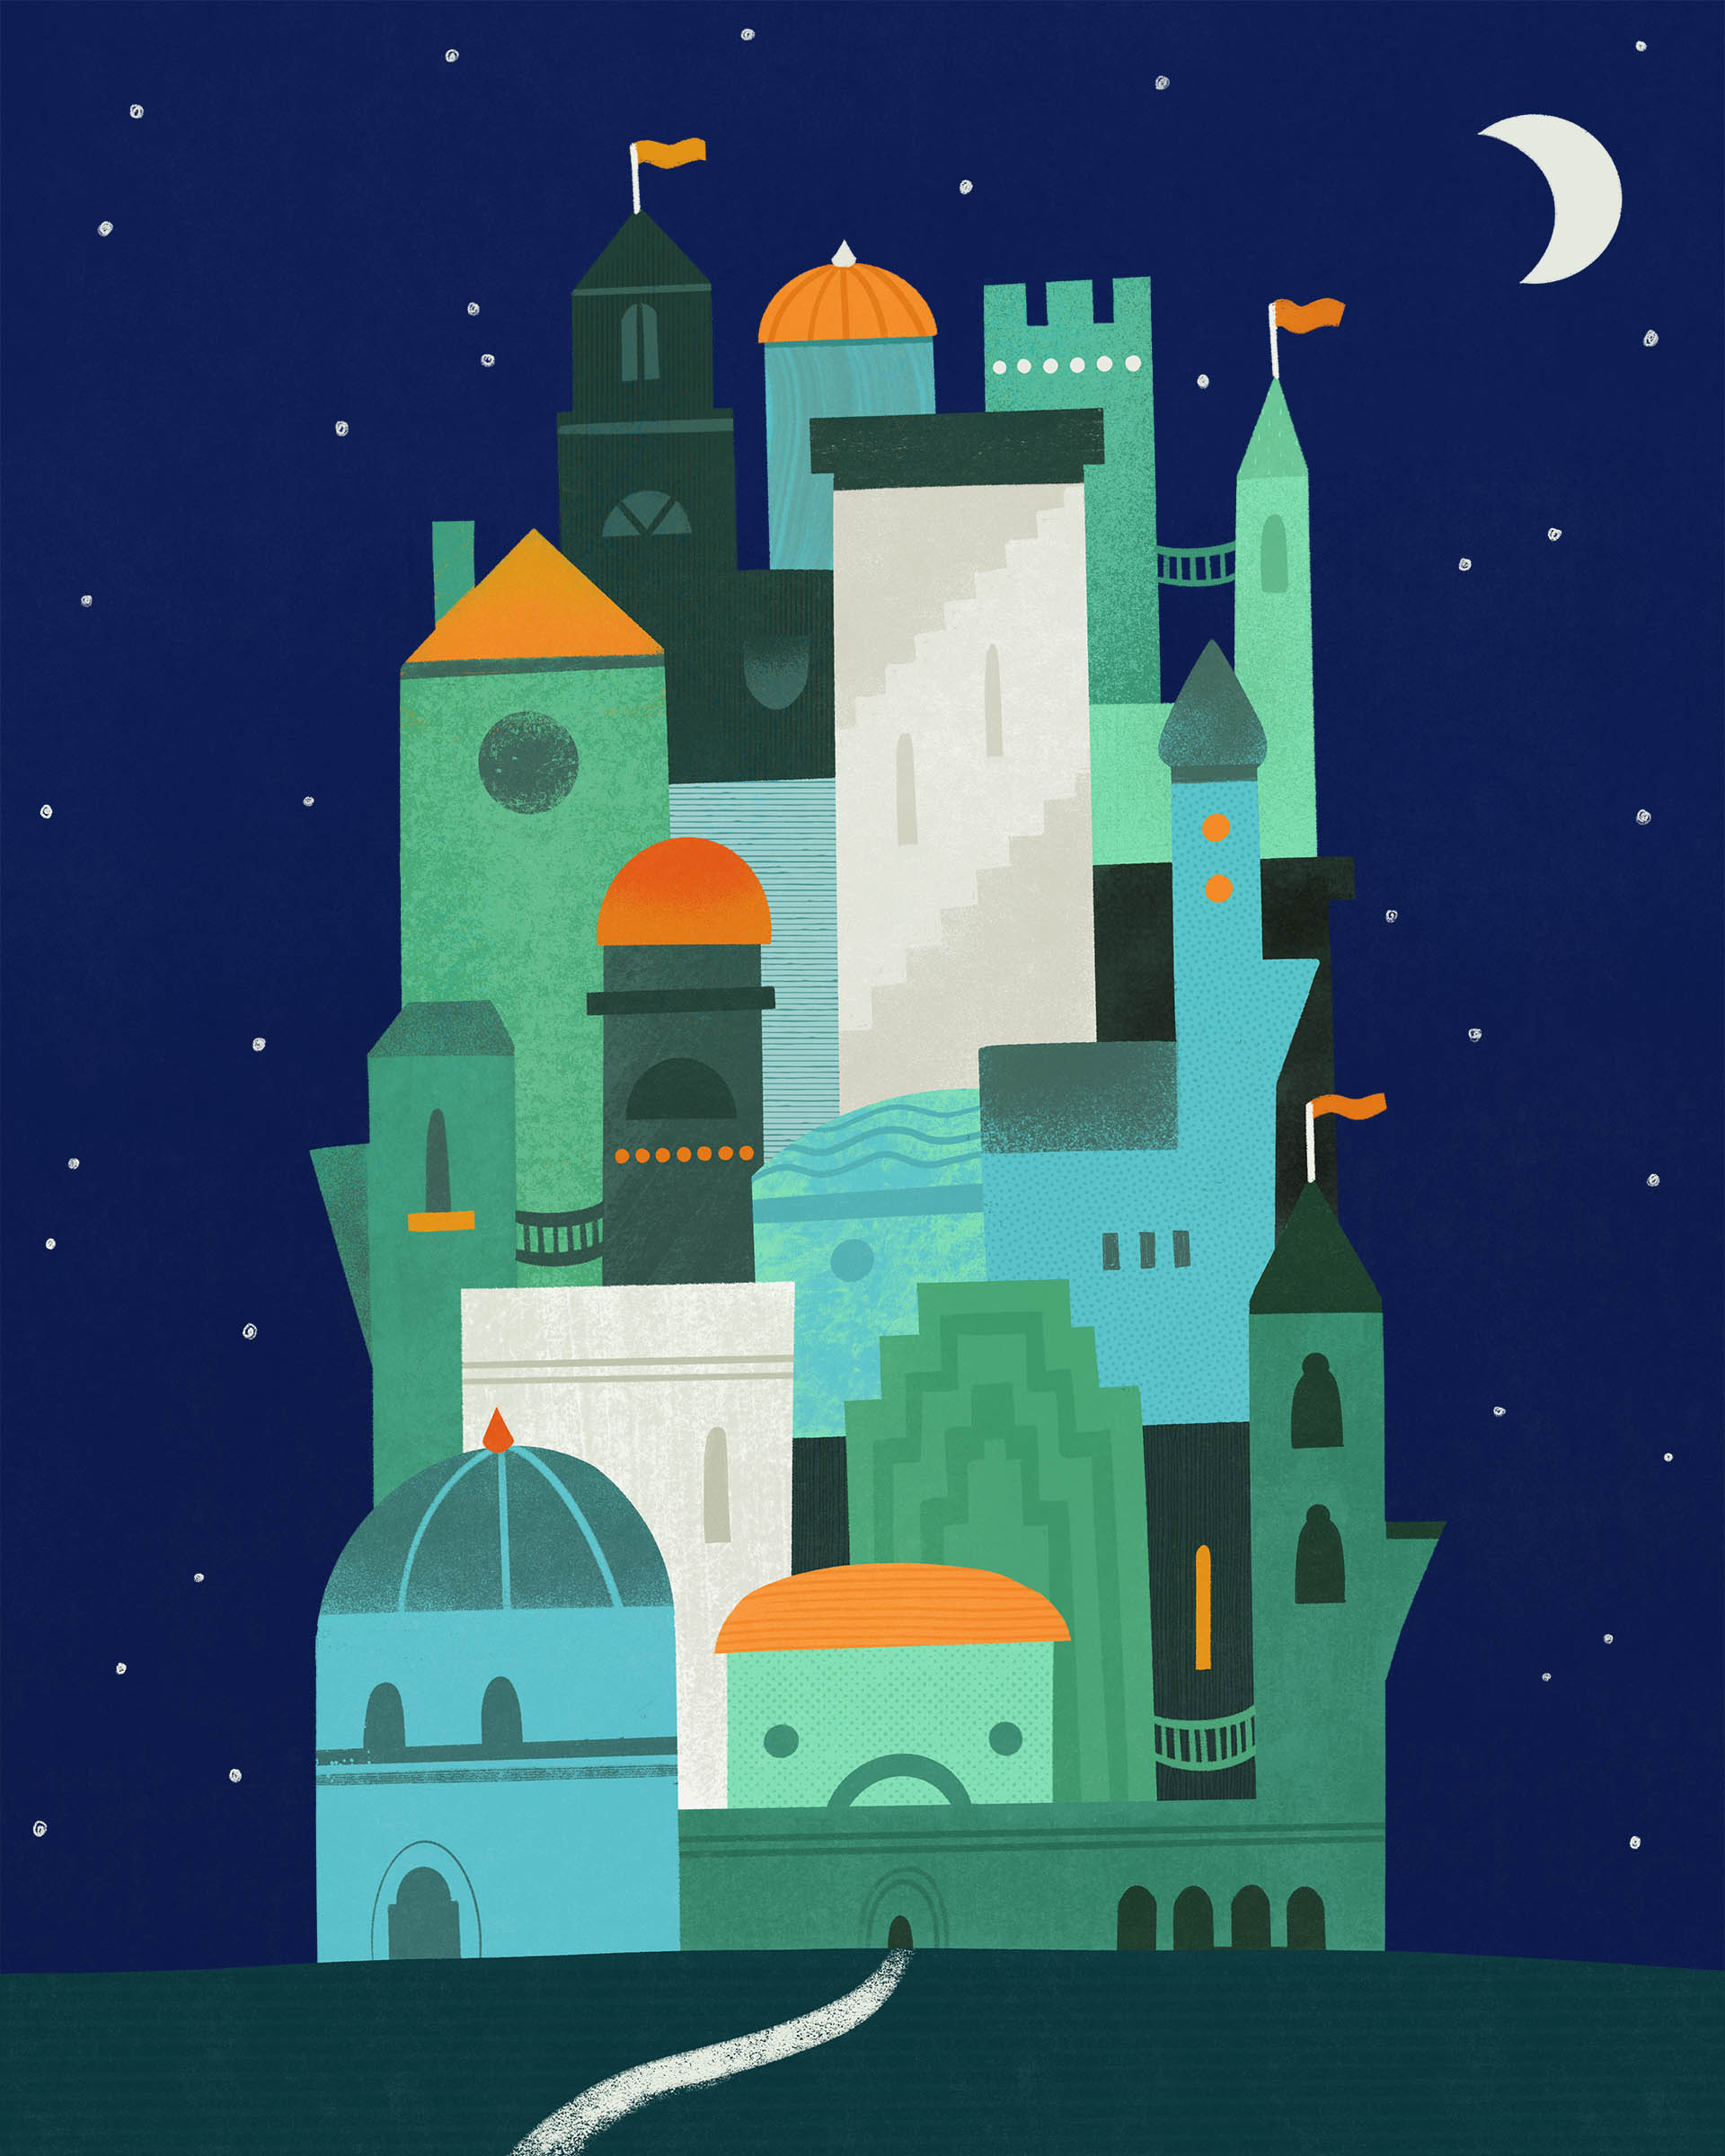 A city with many towers, windows and rooftops. In the background there is a night sky with moon and stars.